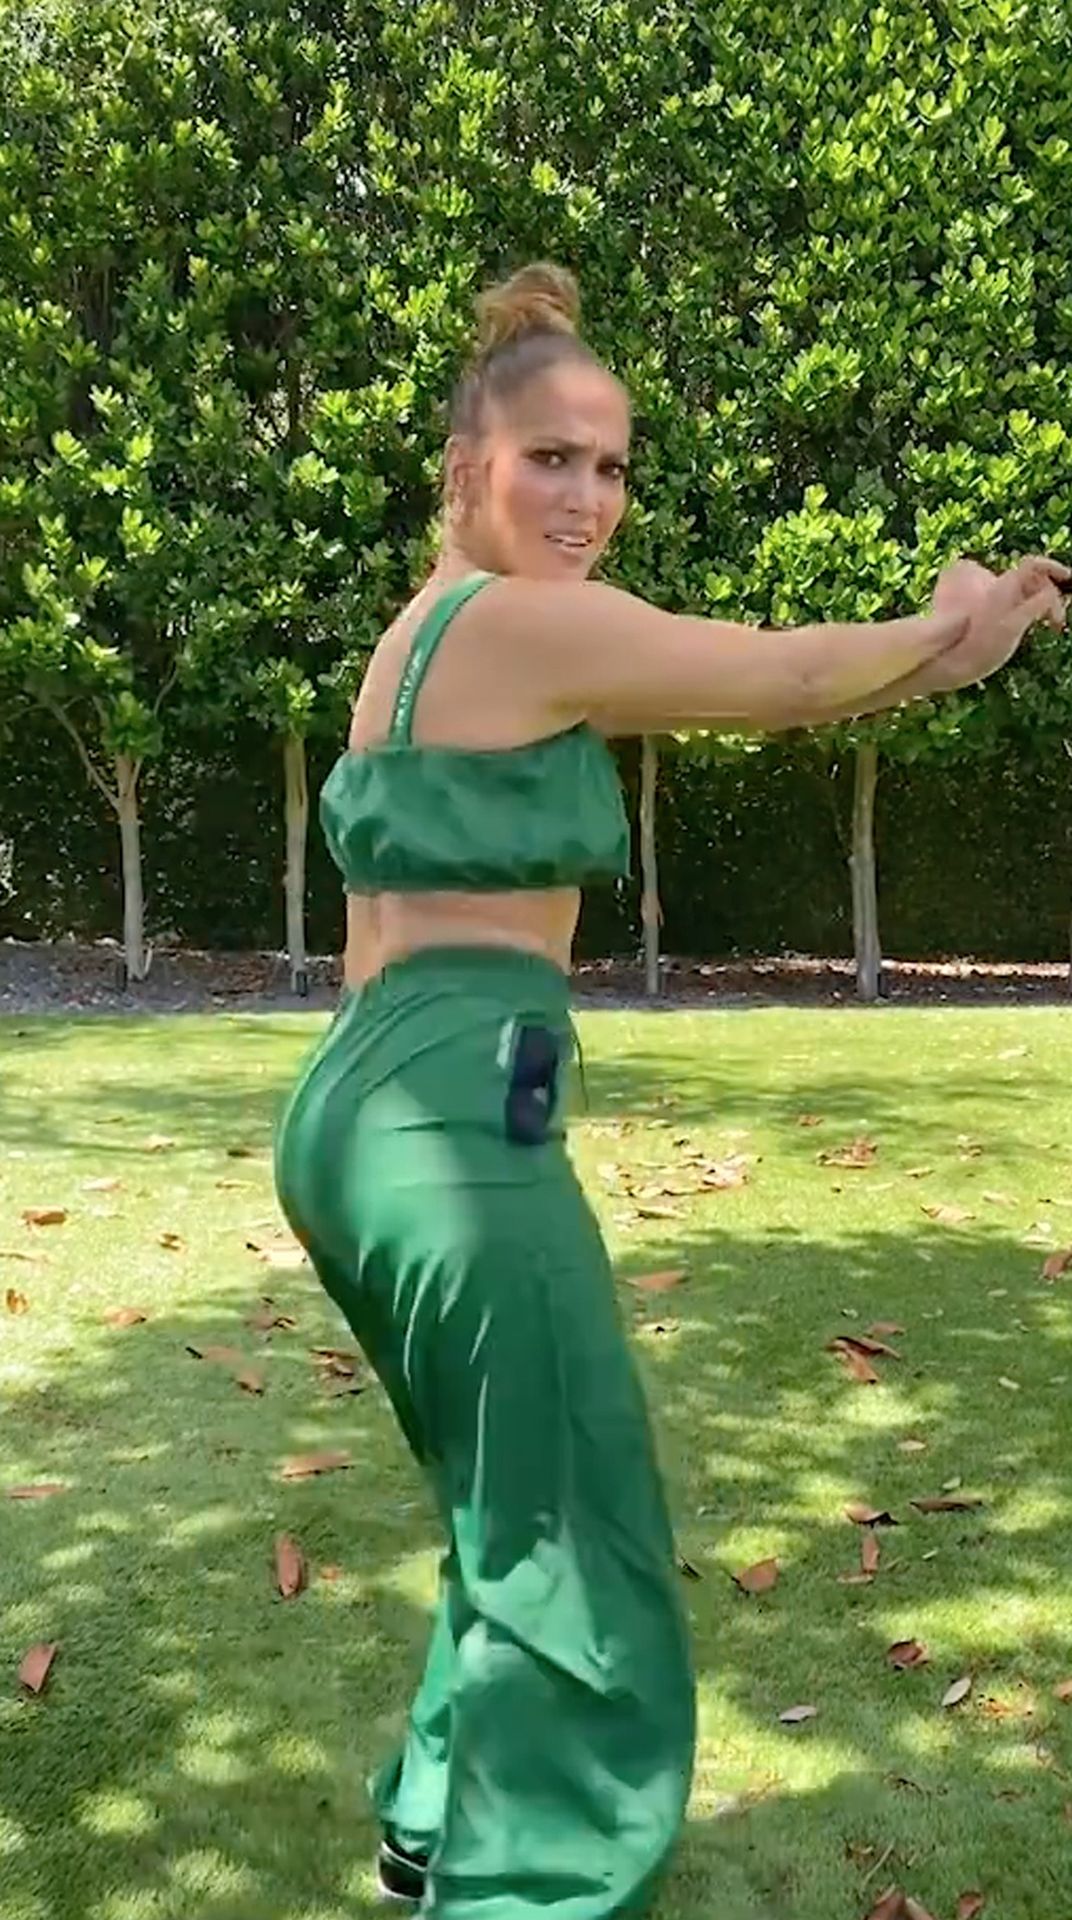 Jennifer Lopez Shows Off Some Serious From TikTok (8 Pics + Video)